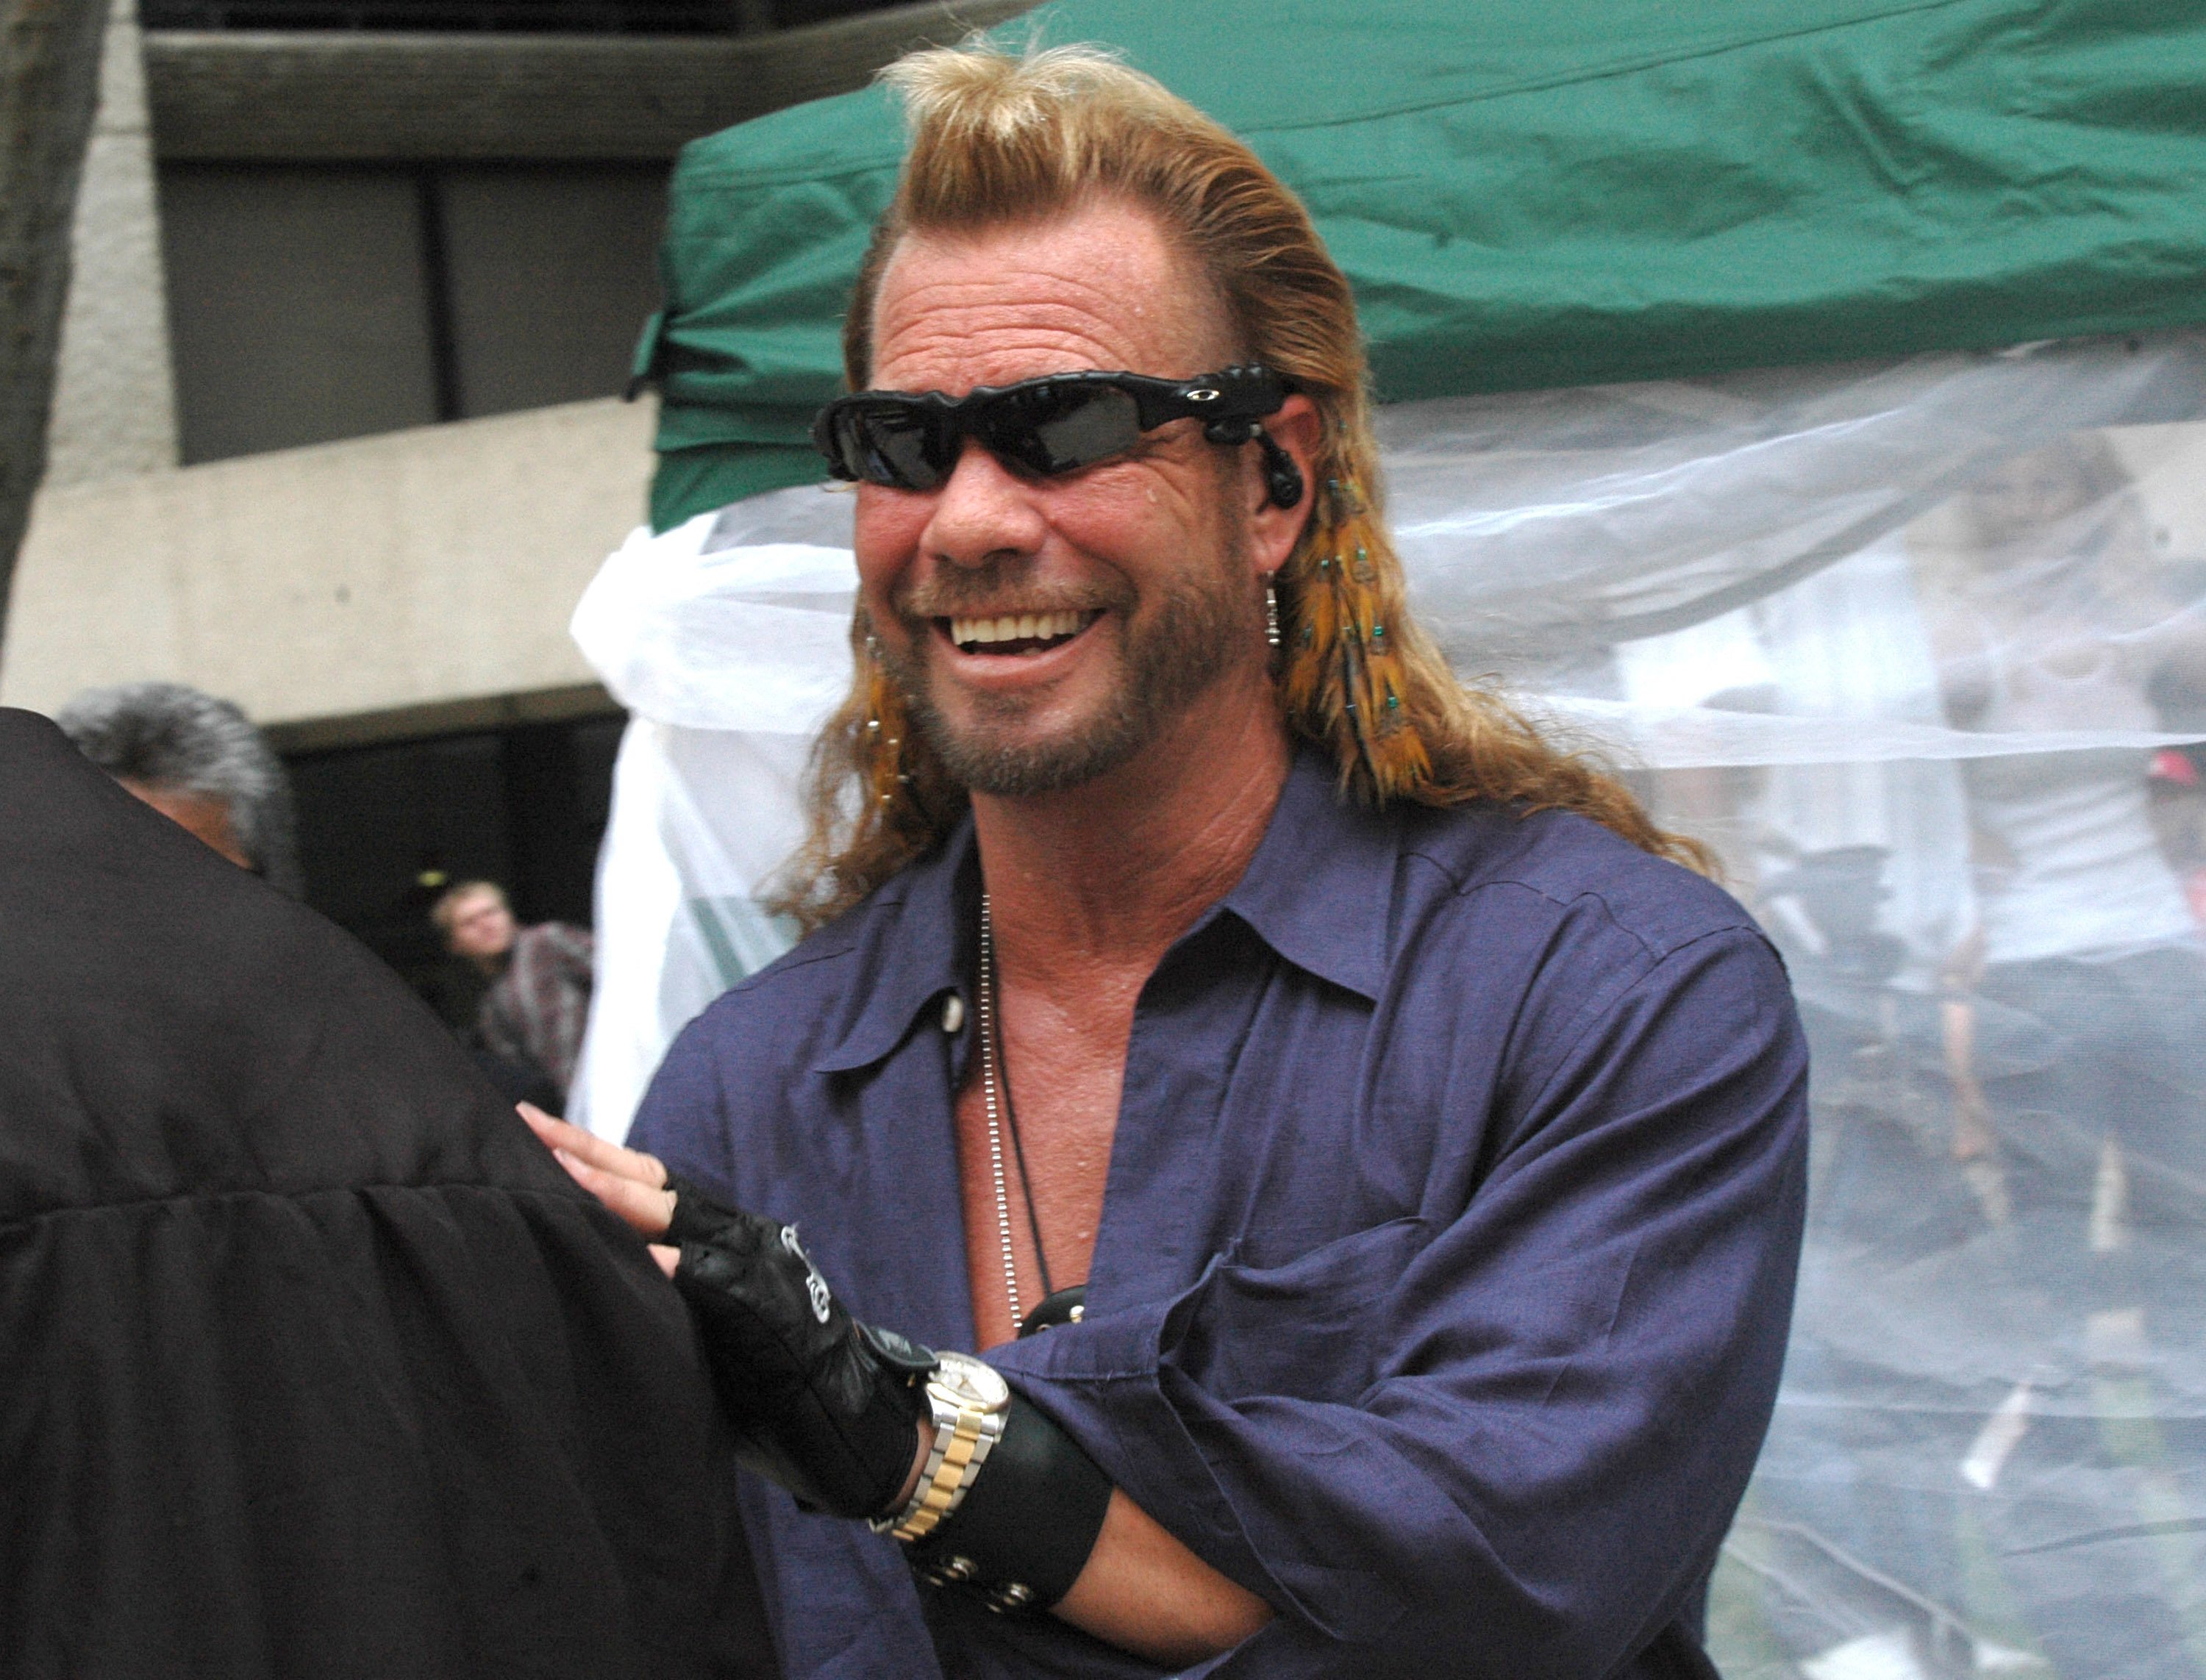 Duane Chapman attend the fundraiser event March of Dimes on November 14, 2006, in Honolulu, Hawaii. | Source: Getty Images